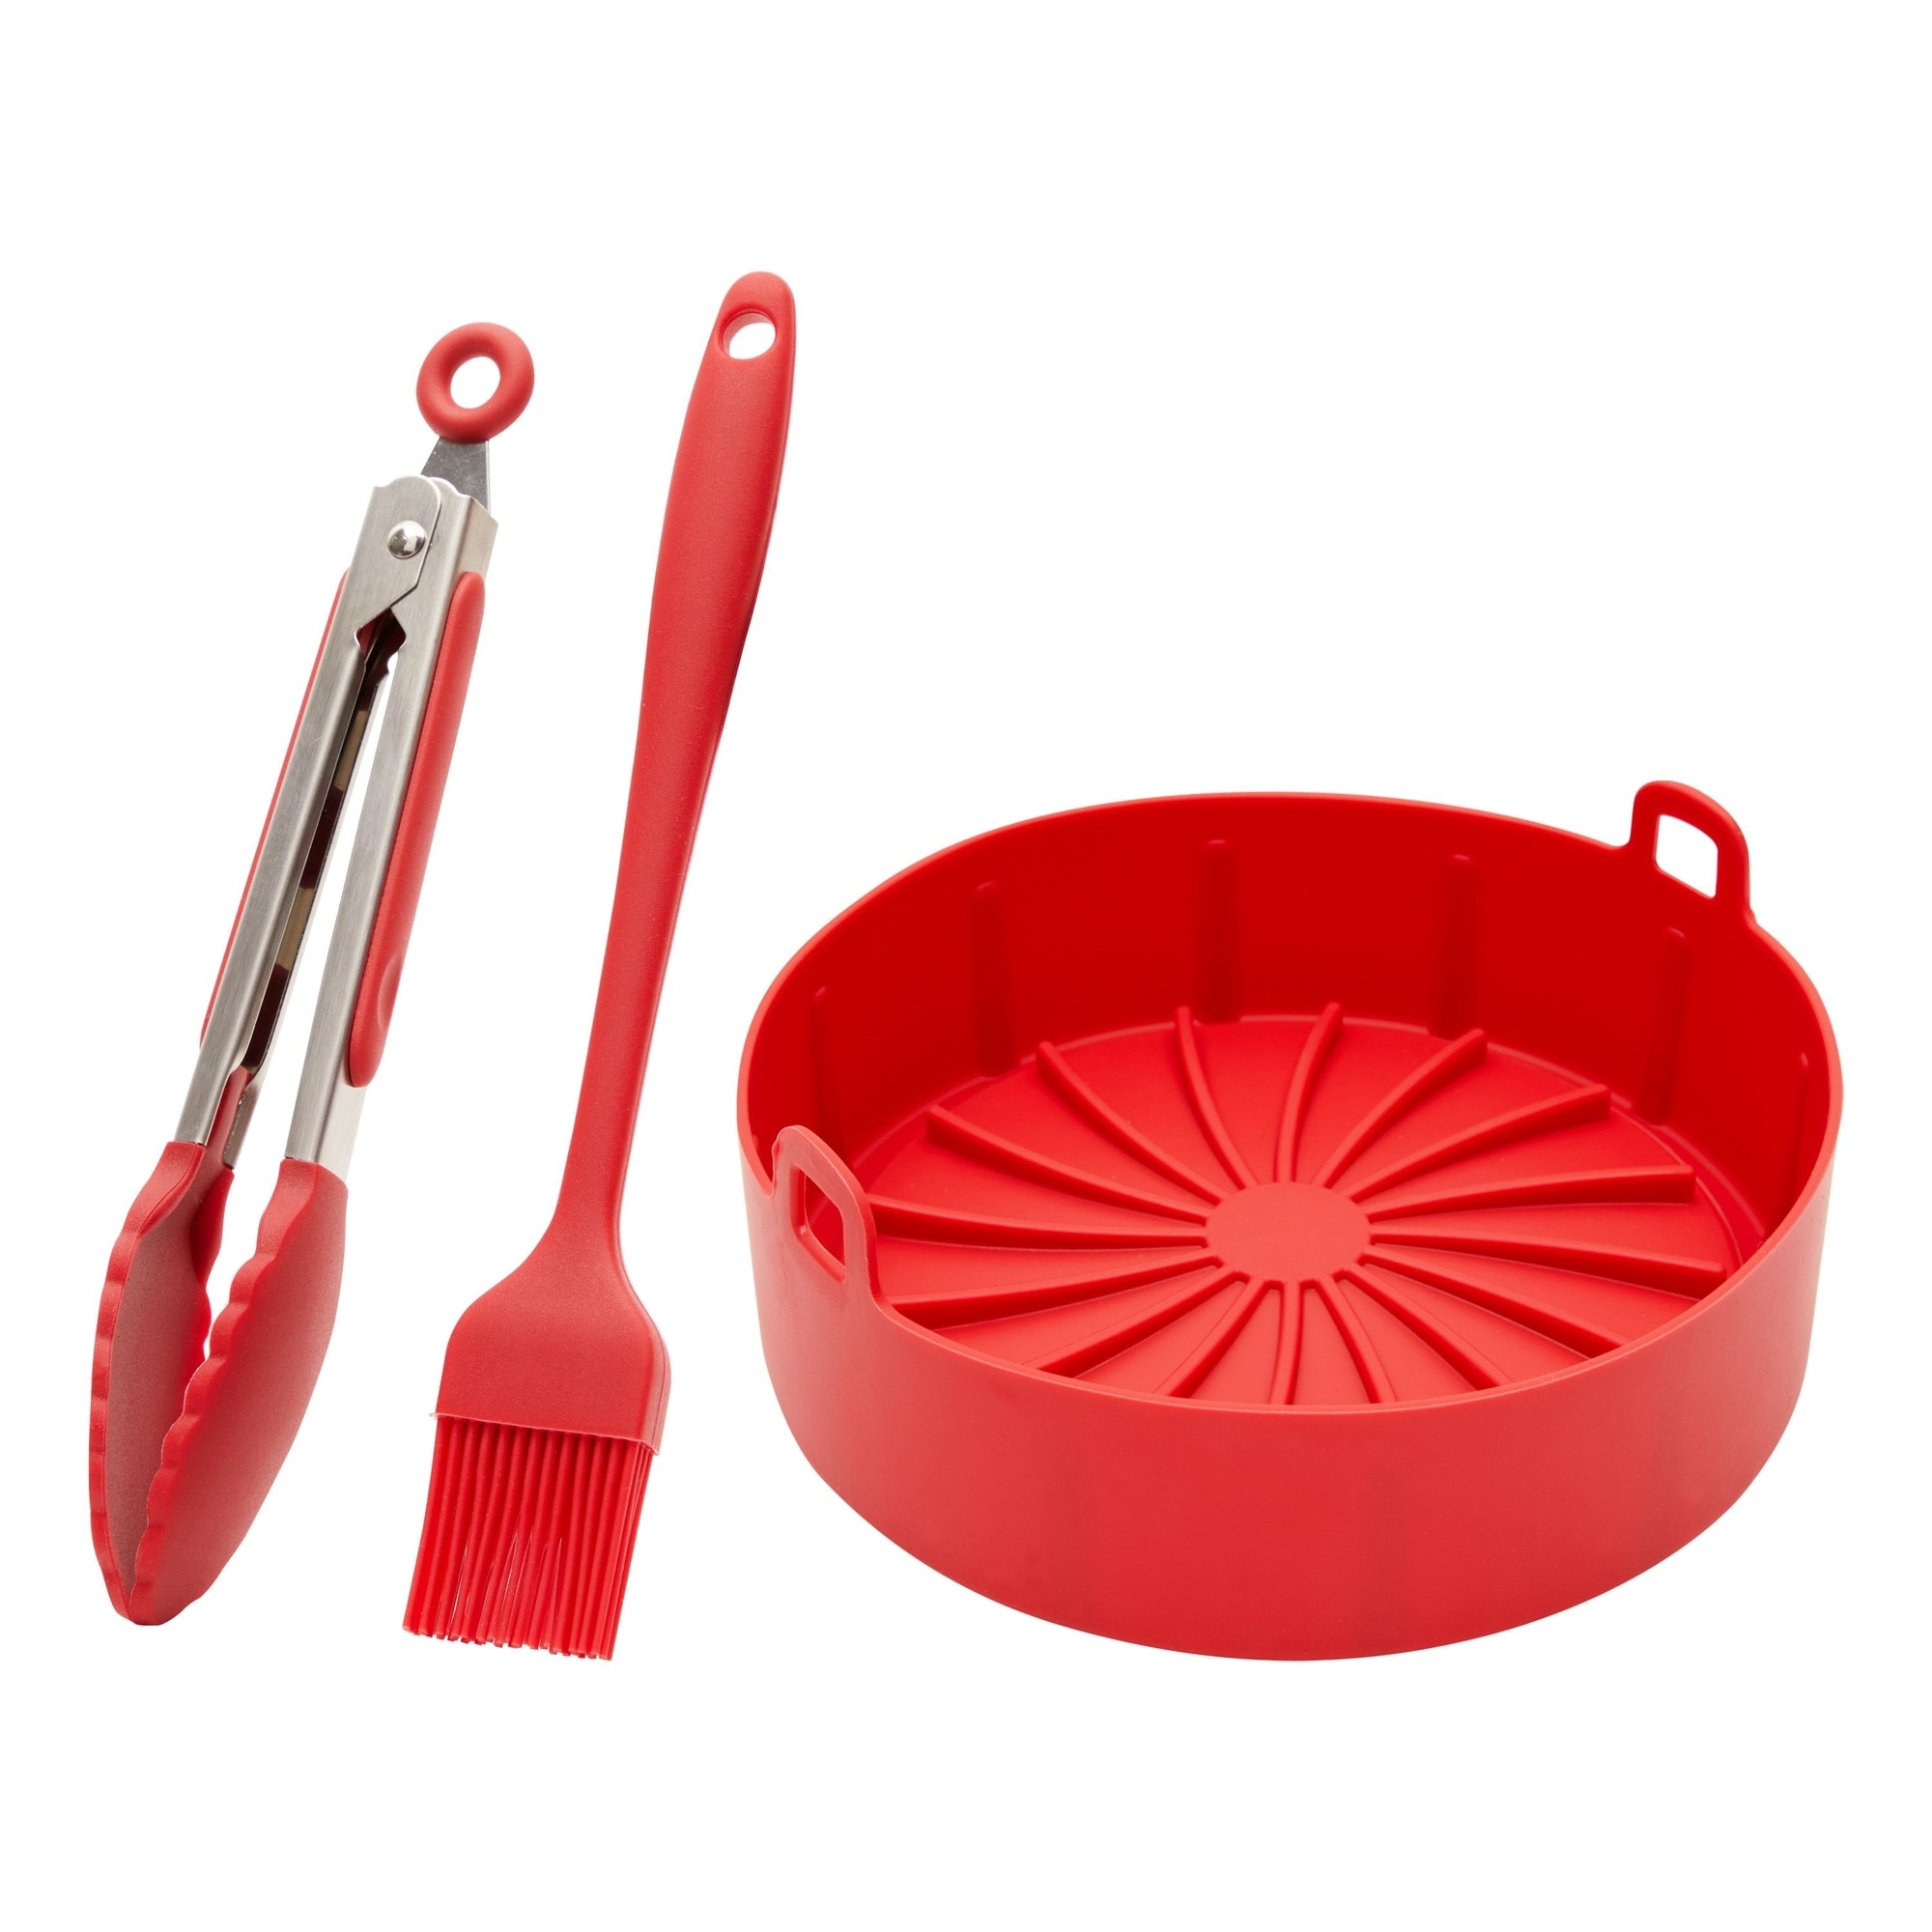 https://ak1.ostkcdn.com/images/products/is/images/direct/0ee959c3b4a2dd919be1e25a855d0cd5004e0b54/4-Piece-Set-Silicone-Pot-Basket-with-Handles%2C-Brush%2C-Tongs-for-Air-Fryer-Liner-%287.5-In%2C-Red%29.jpg